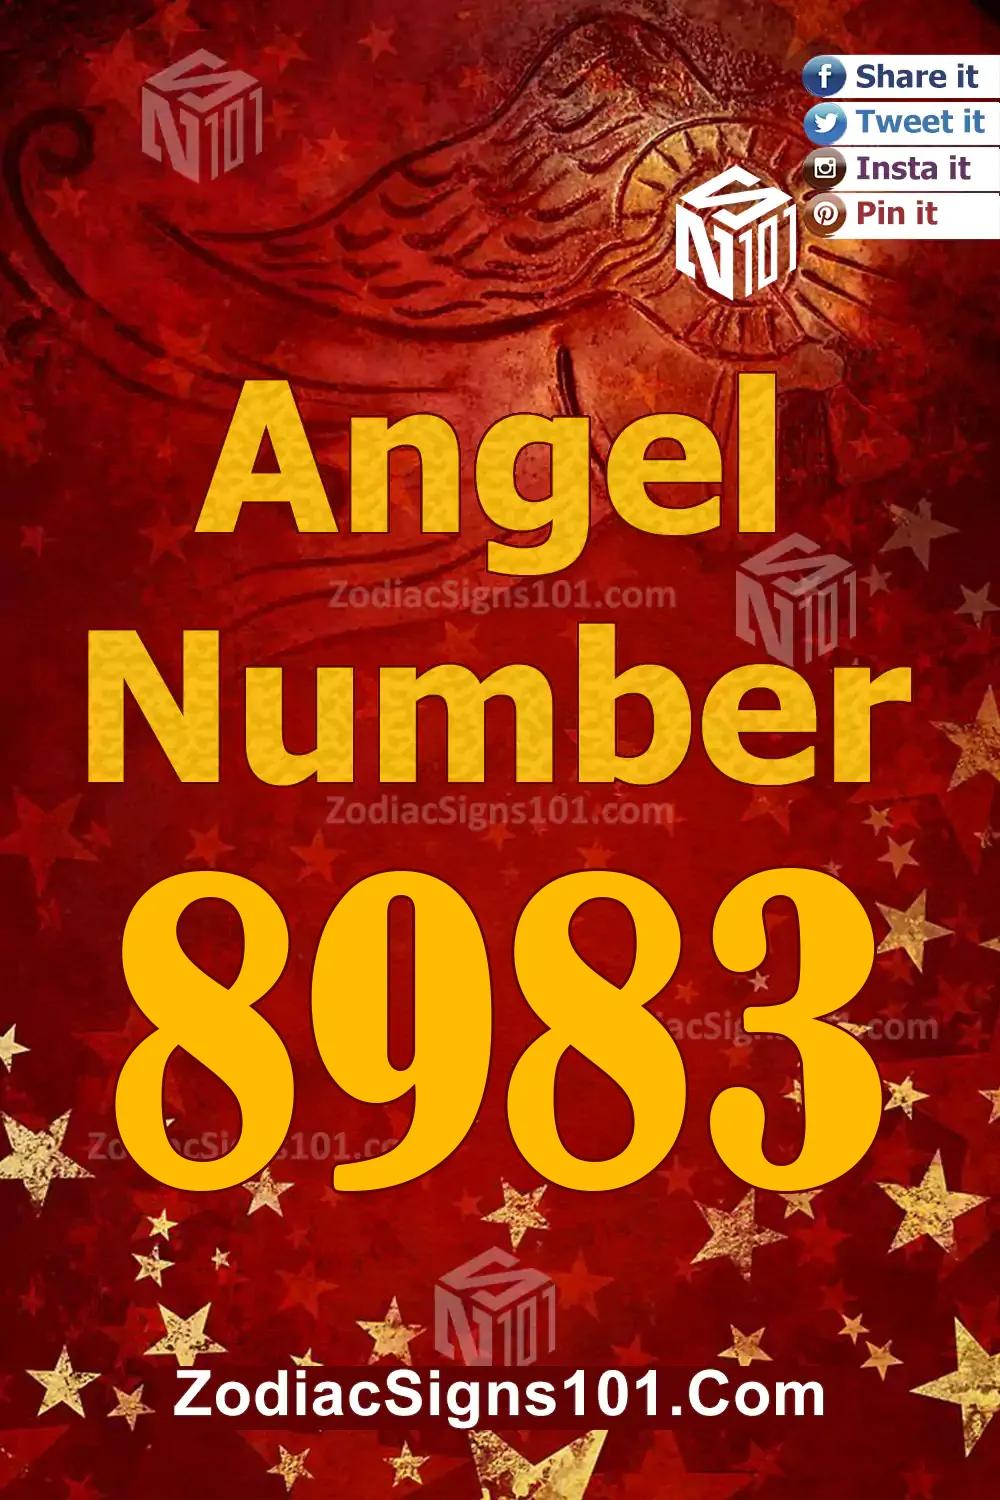 8983 Angel Number Meaning